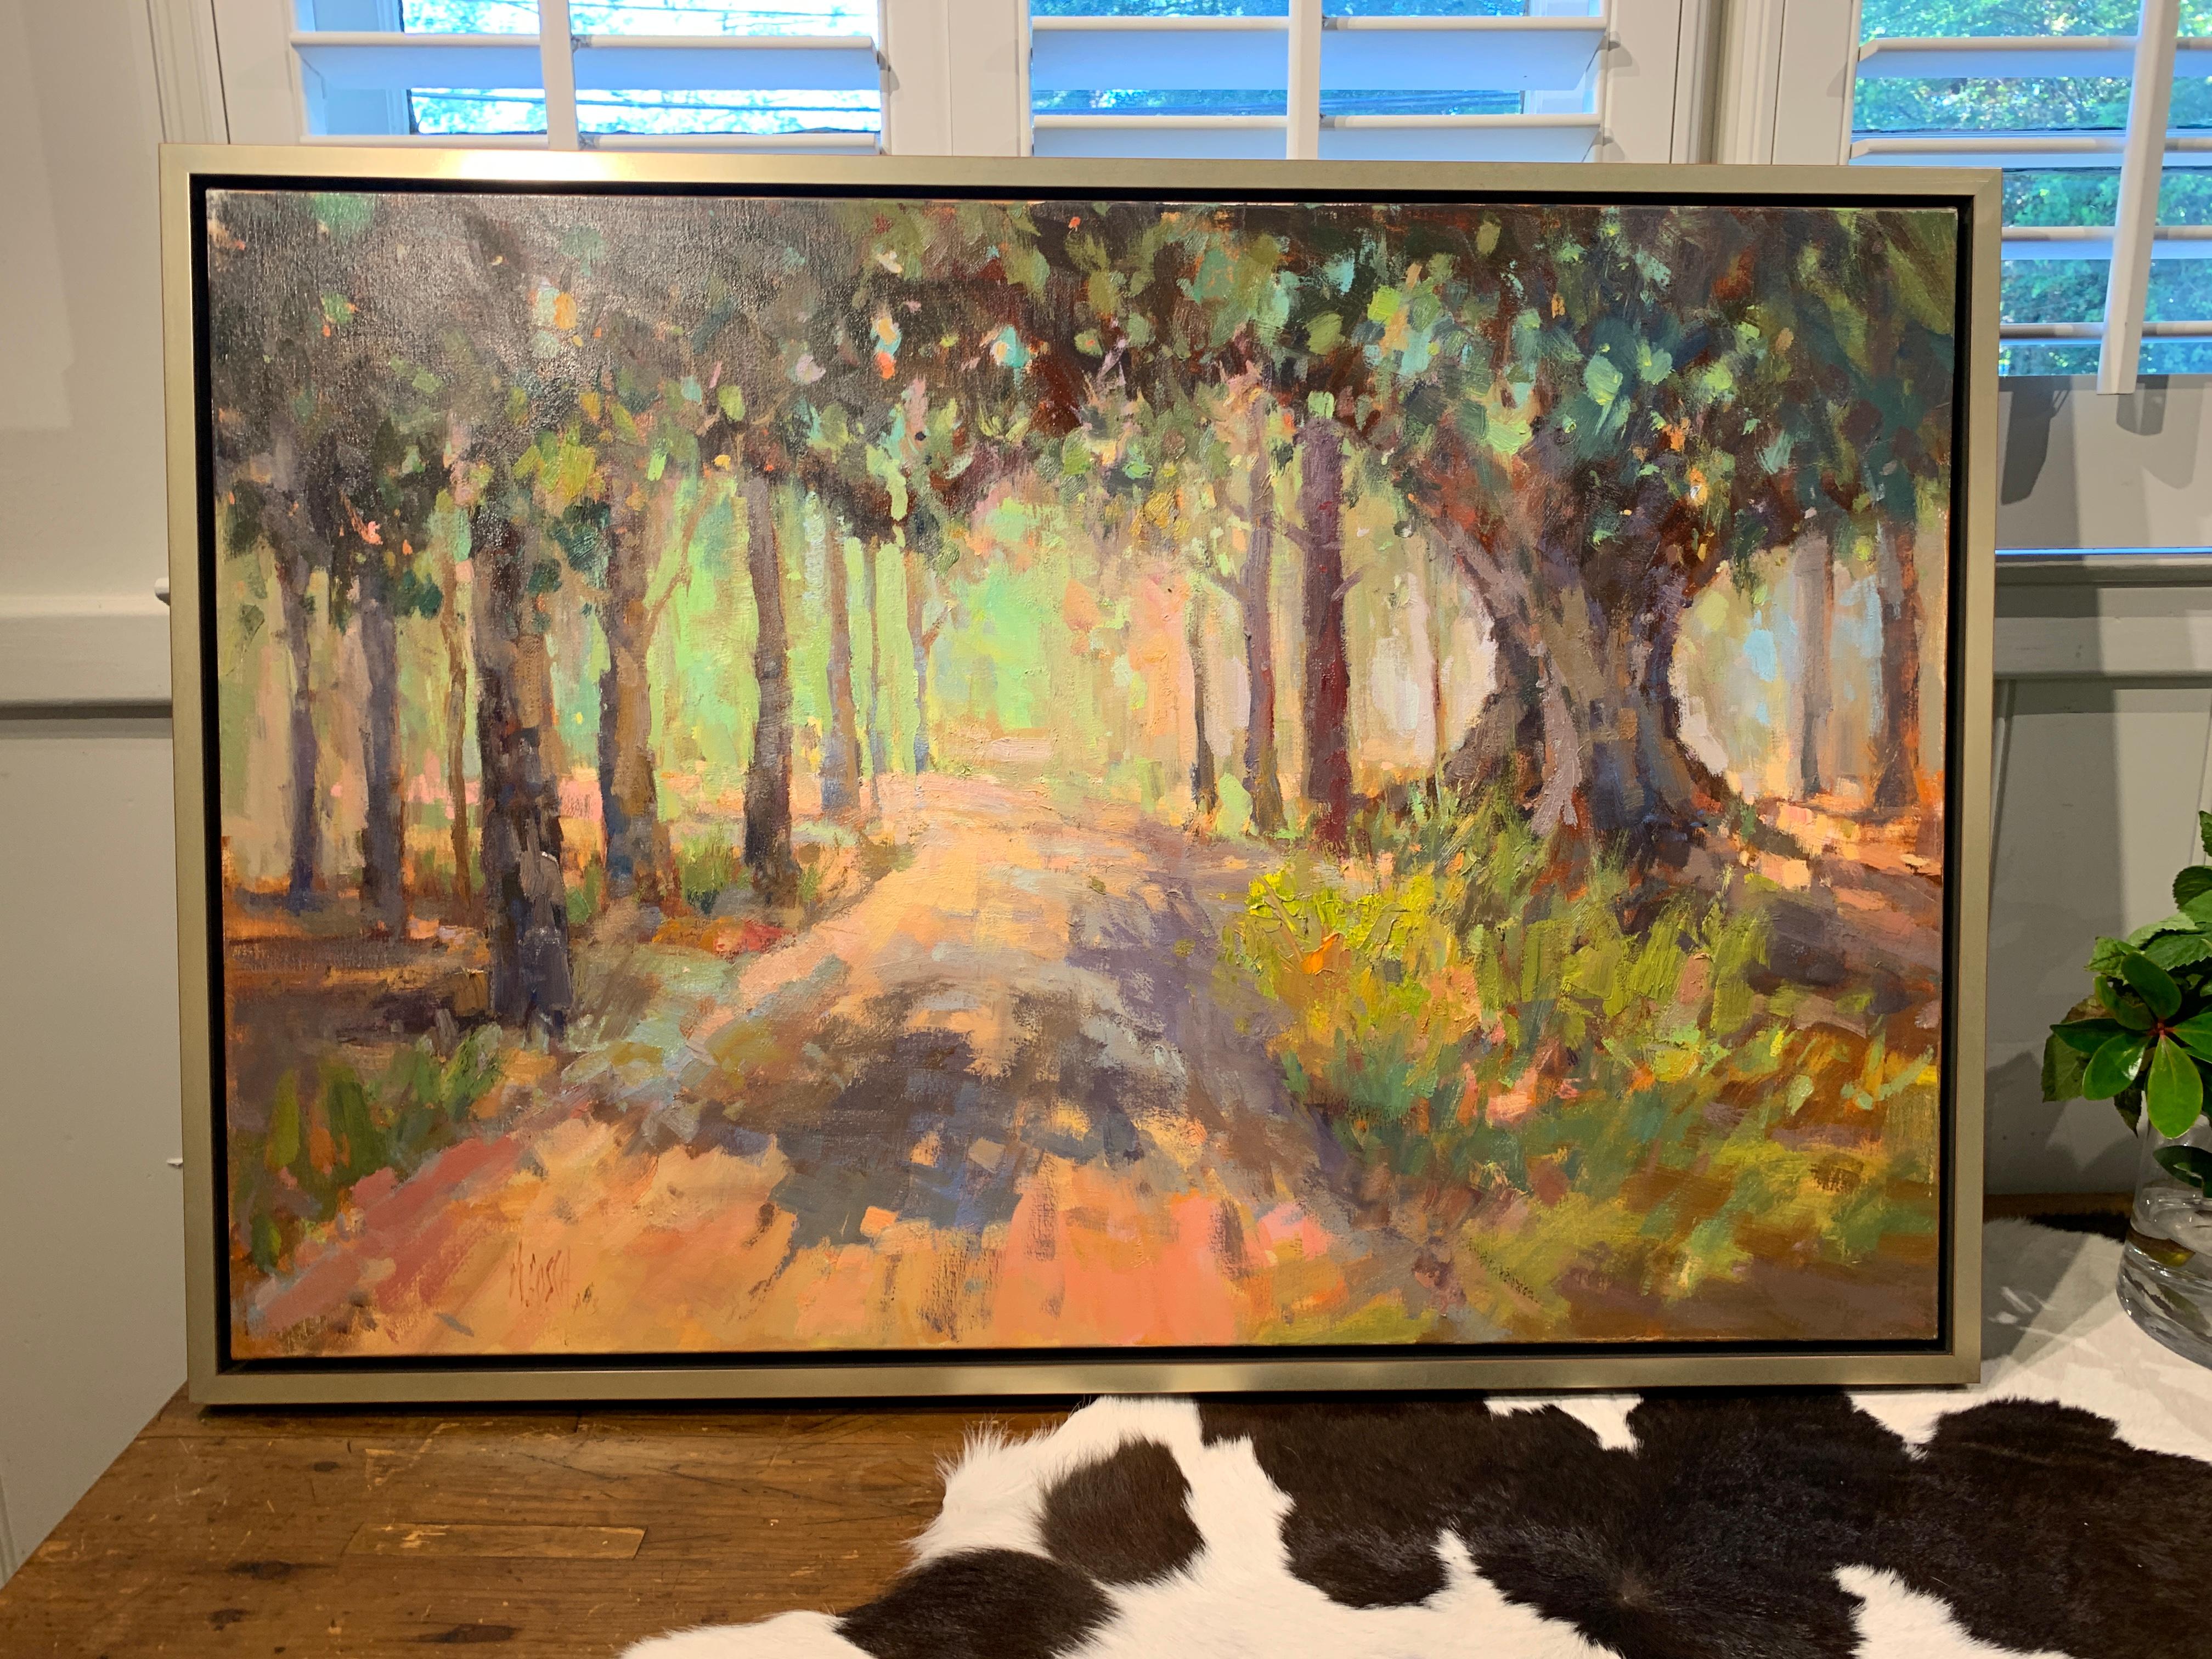 'Southern Pines' is a framed Impressionist oil on canvas plein-air landscape painting created by American artist Millie Gosch in 2019. Featuring a palette mostly made of green, brown, pink, purple, orange and blue tones, the painting depicts a dirt